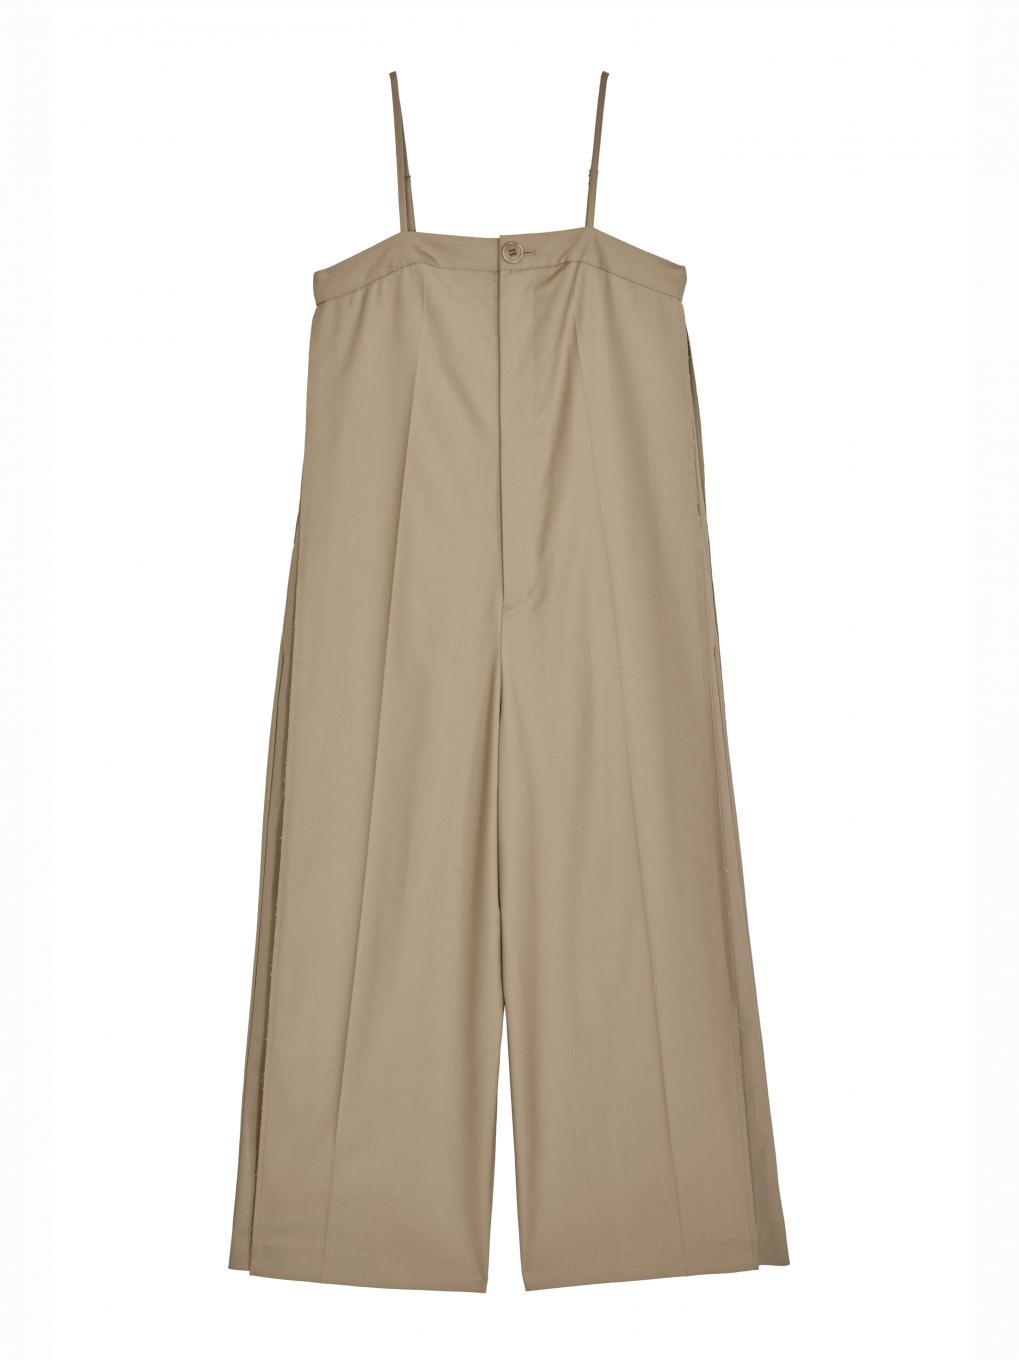 What do you call that type of trousers with a suspender? - Quora